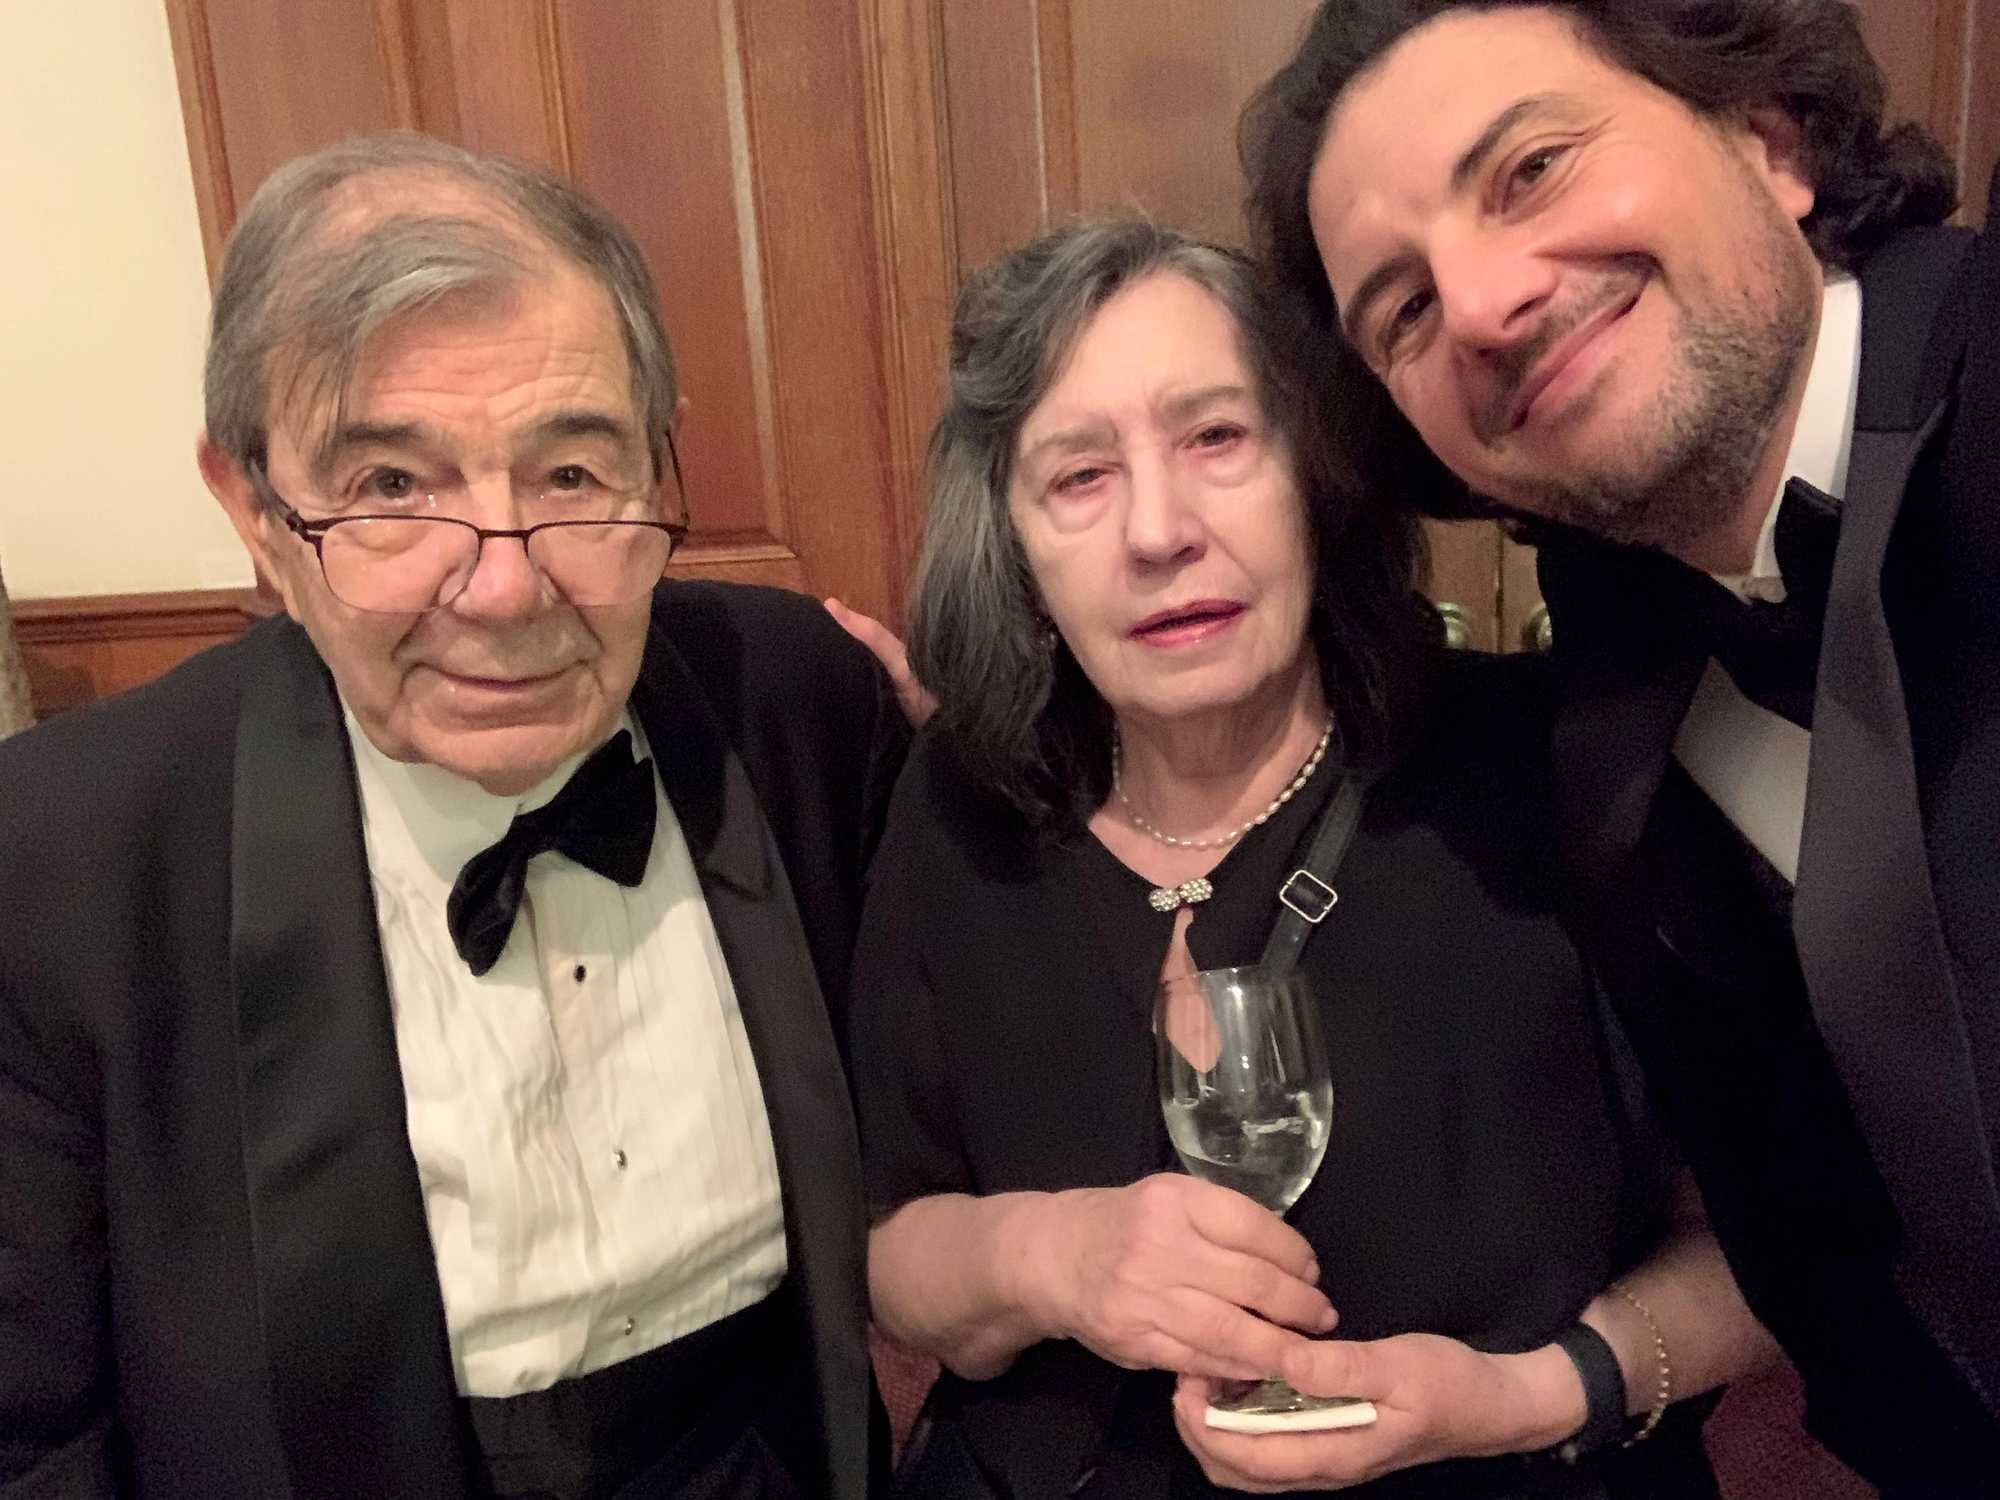 David Sabatini, with his father, David, a scientist and former chair of the department of cell biology at NYU Grossman School of Medicine, and his mother, Zulema, a retired physician.